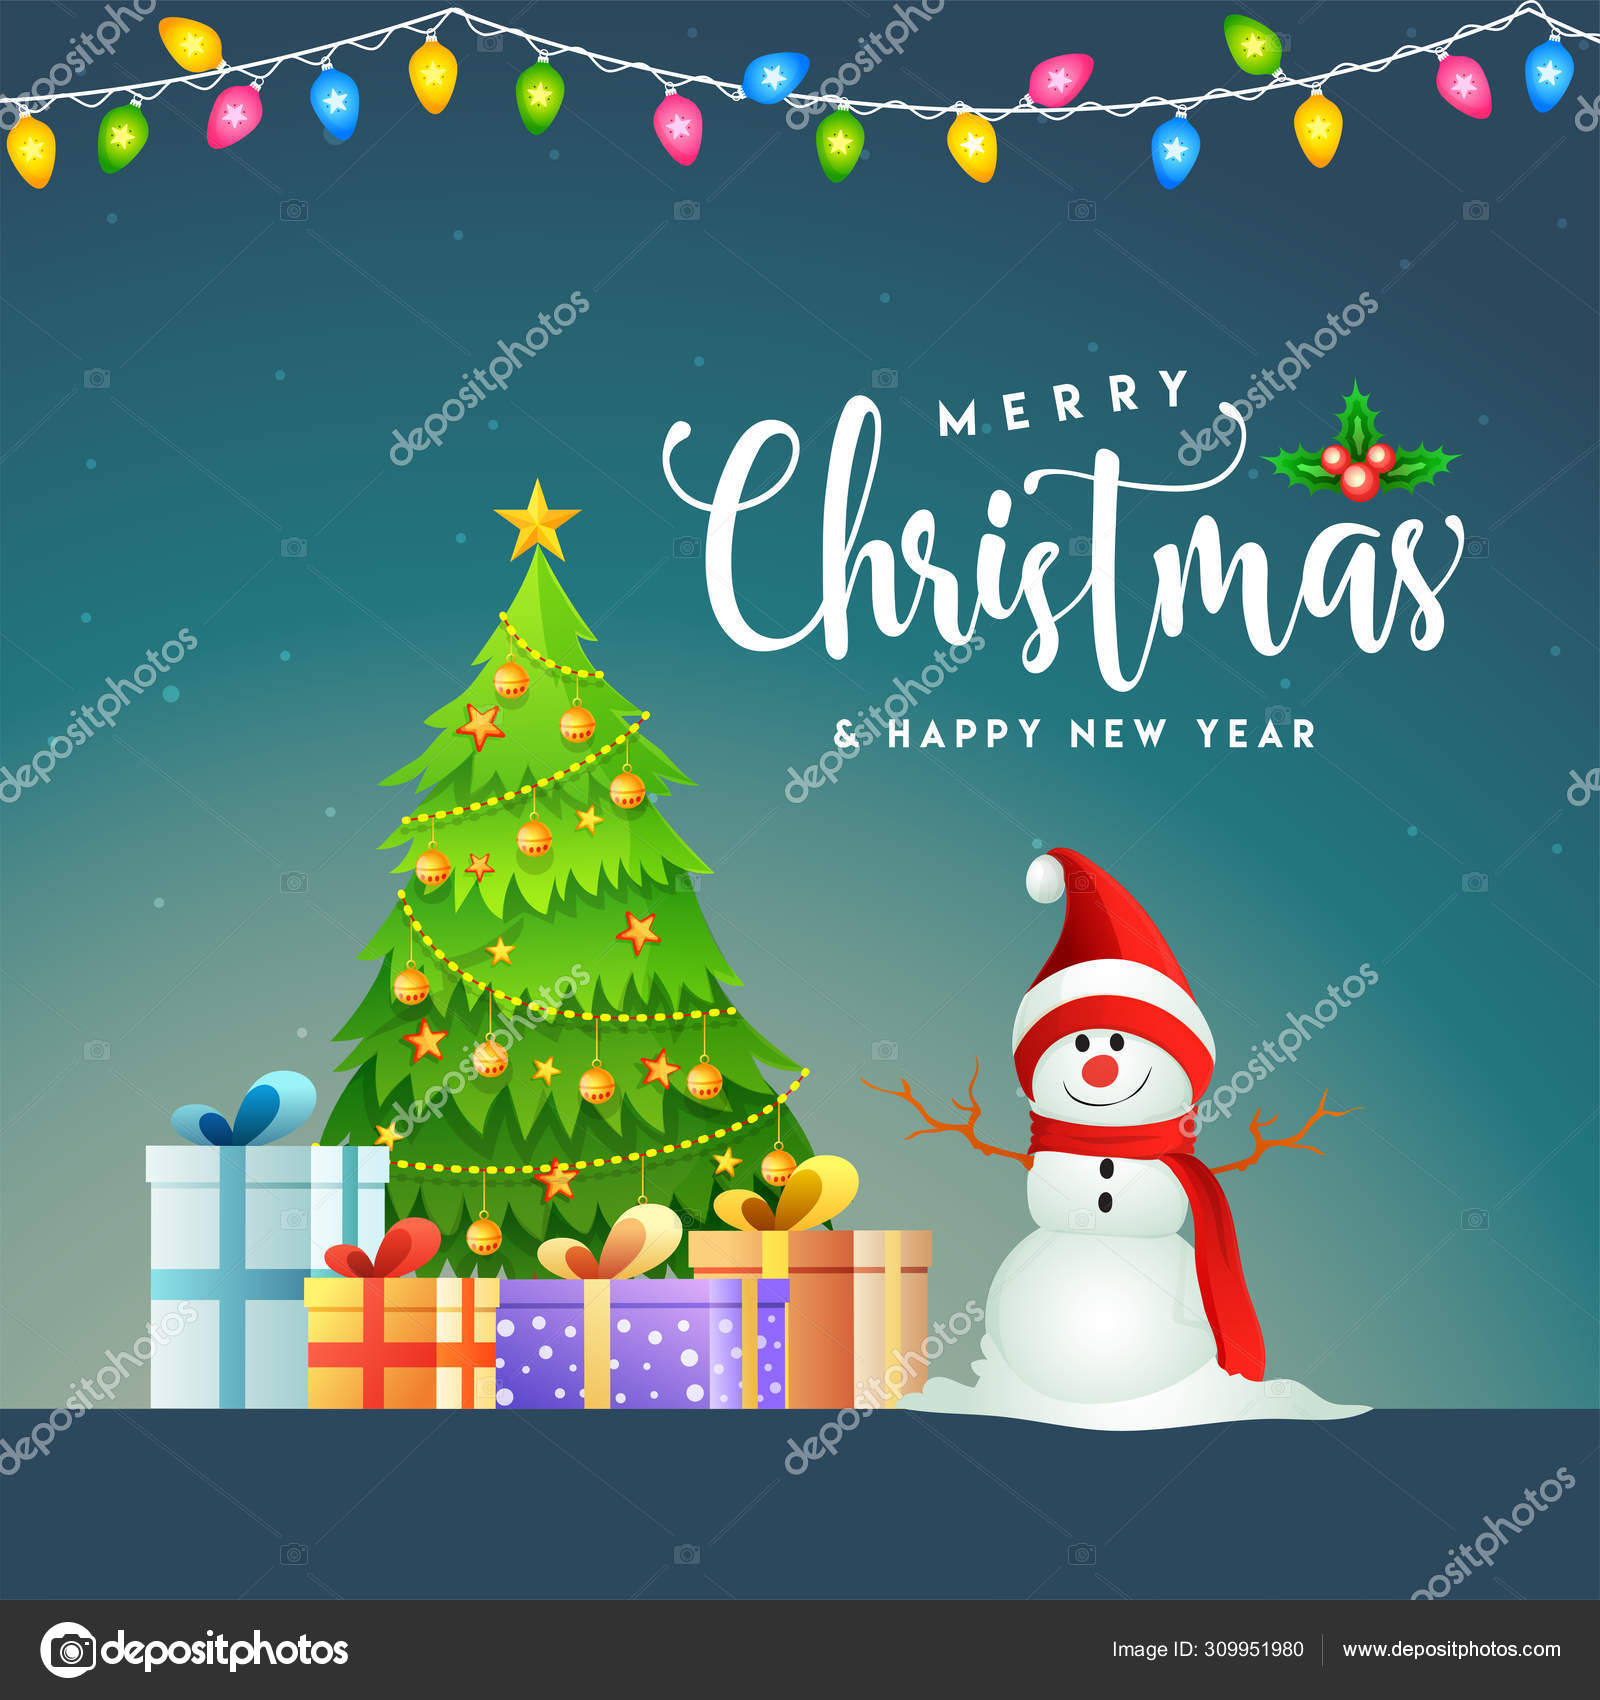 Greeting Card Or Poster Design With Decorative Xmas Tree Gift B Stock Vector C Alliesinteract 309951980